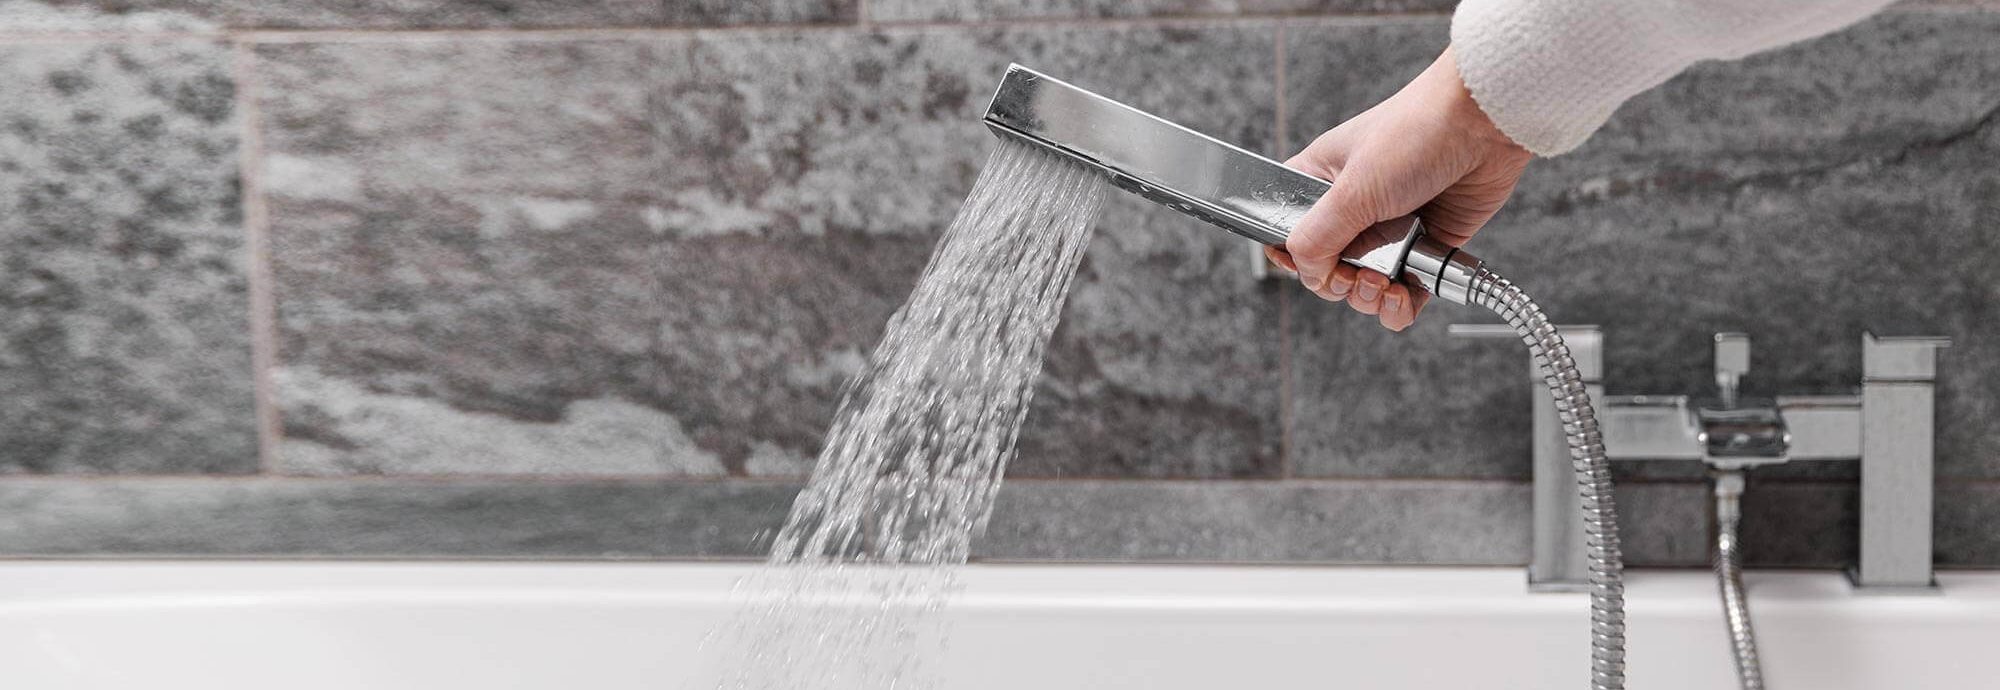 A handheld shower head with a powerful water pressure